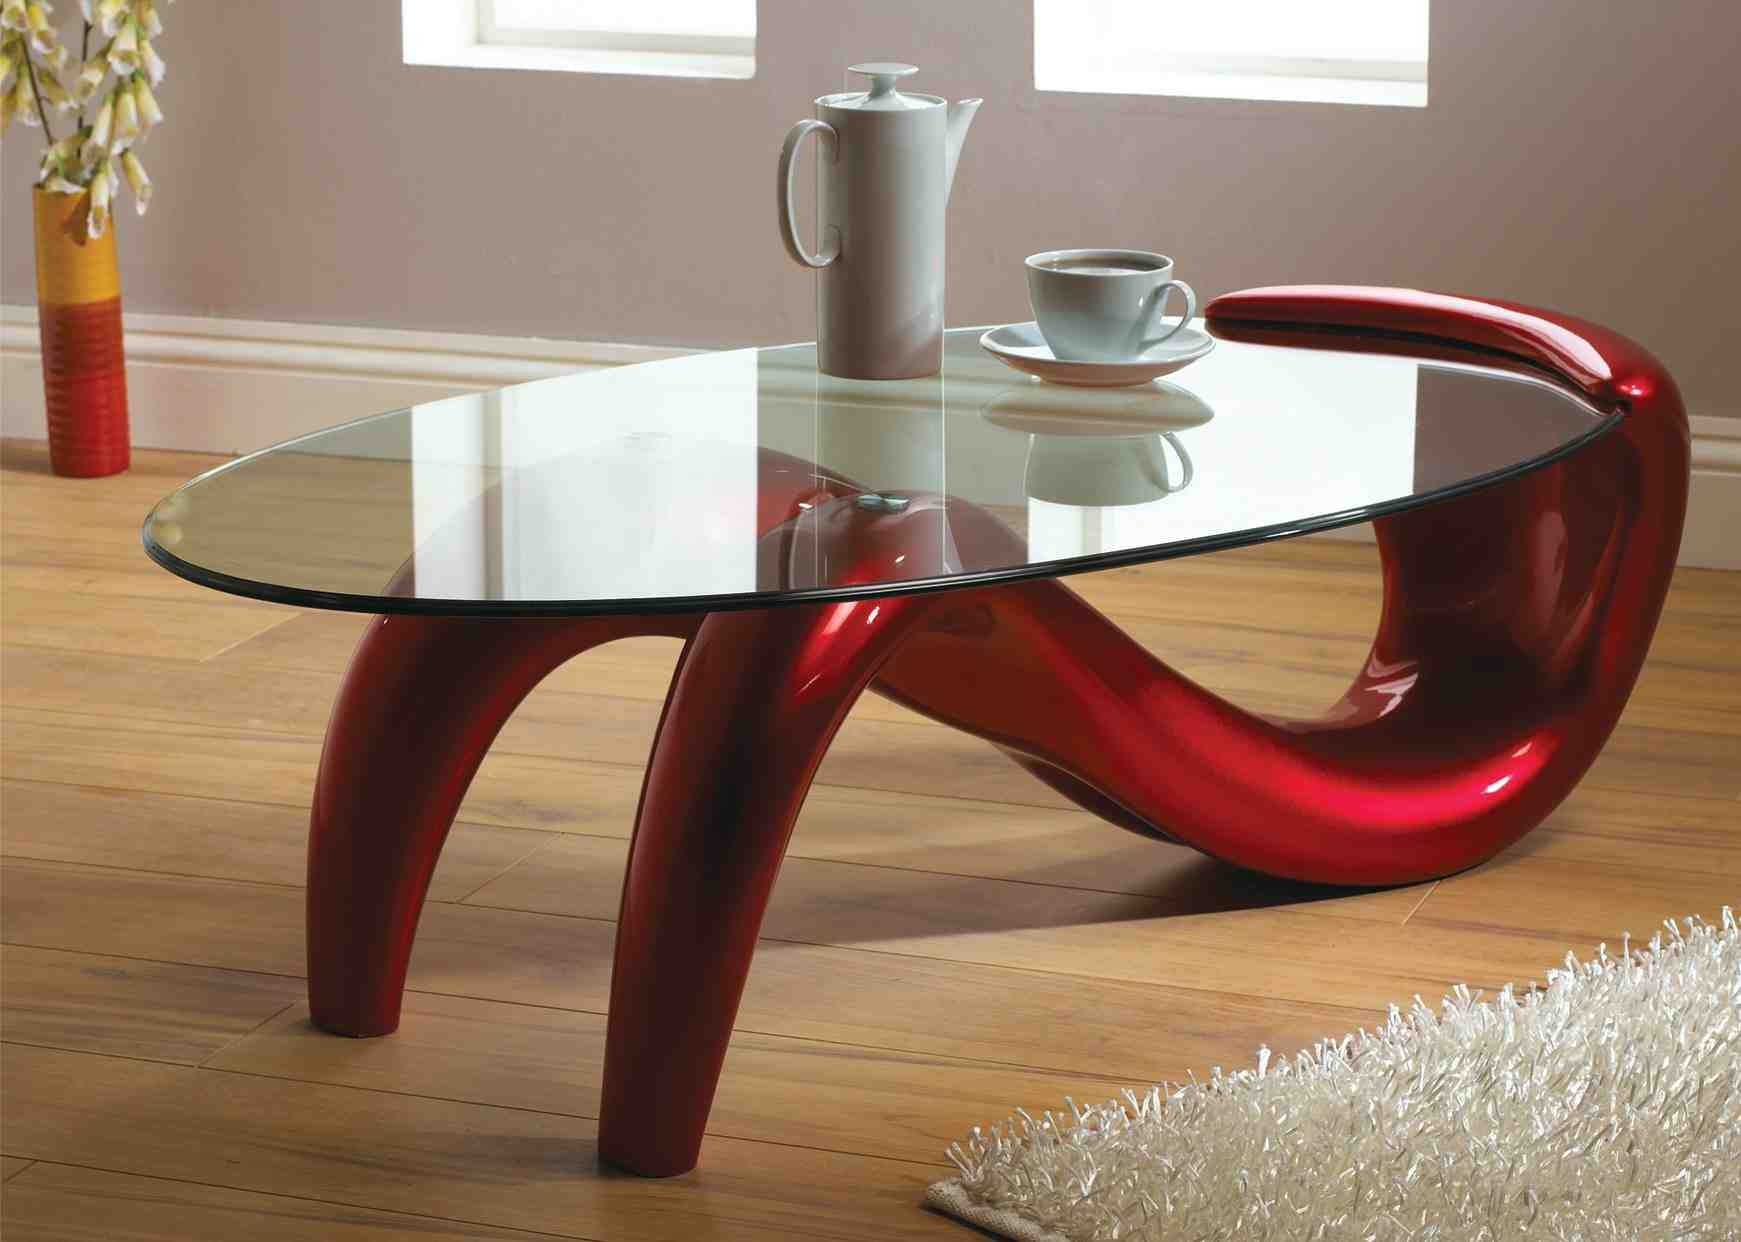 Contemporary Glass Coffee Tables For A Sleek Look